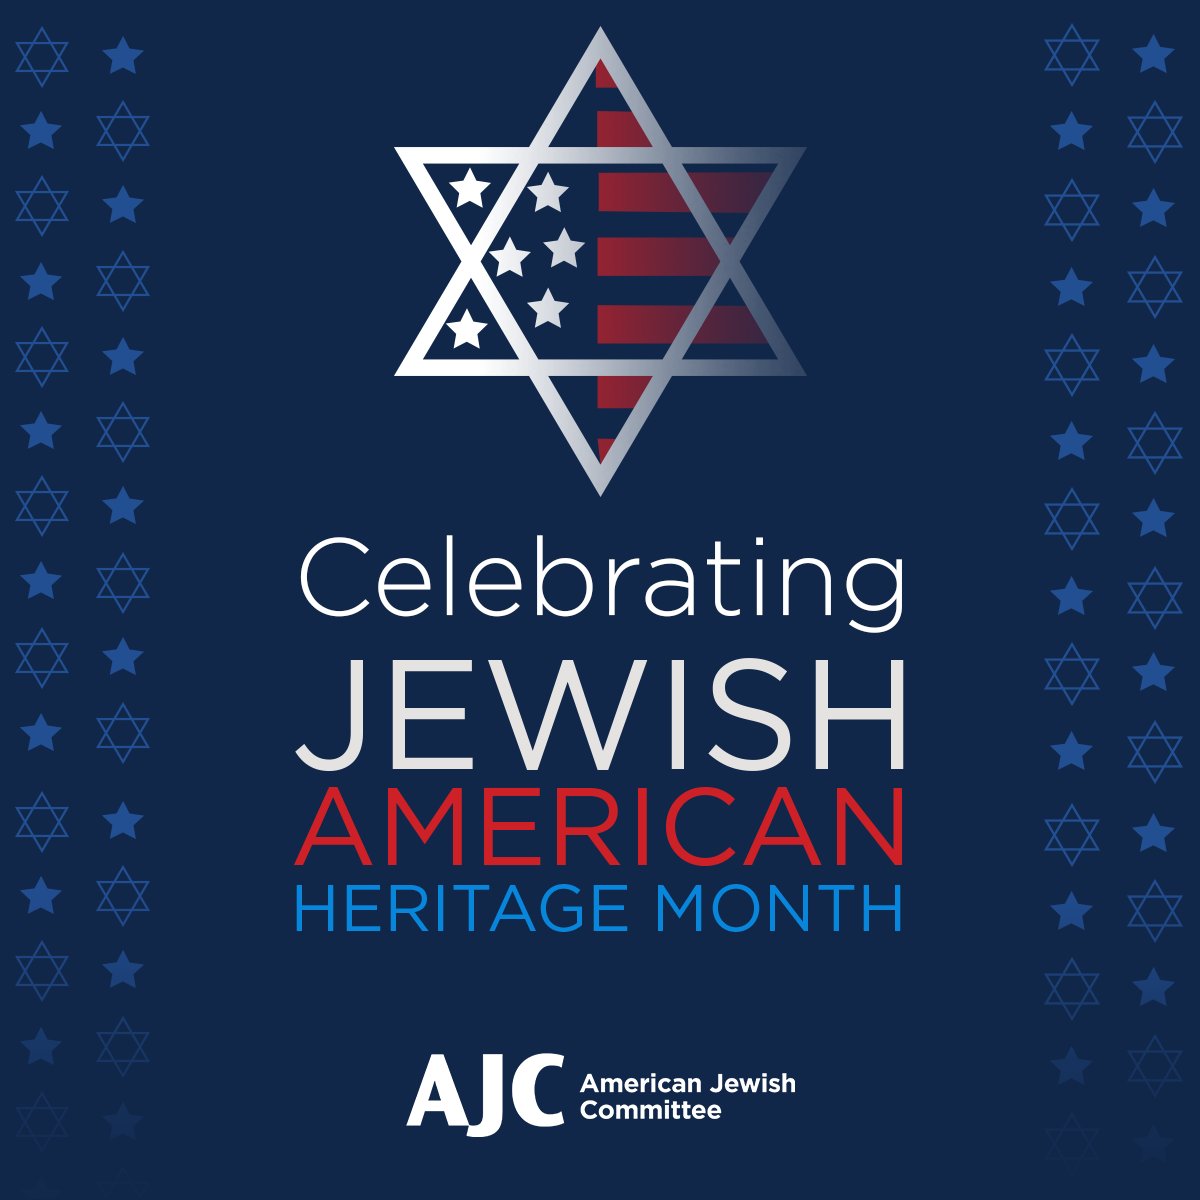 Today begins Jewish American Heritage Month, a time to celebrate the many contributions of American Jews to our nation's rich tapestry. Yet, many in our community feel threatened and isolated right now. In this tumultuous moment, we stand tall in honoring our community's…